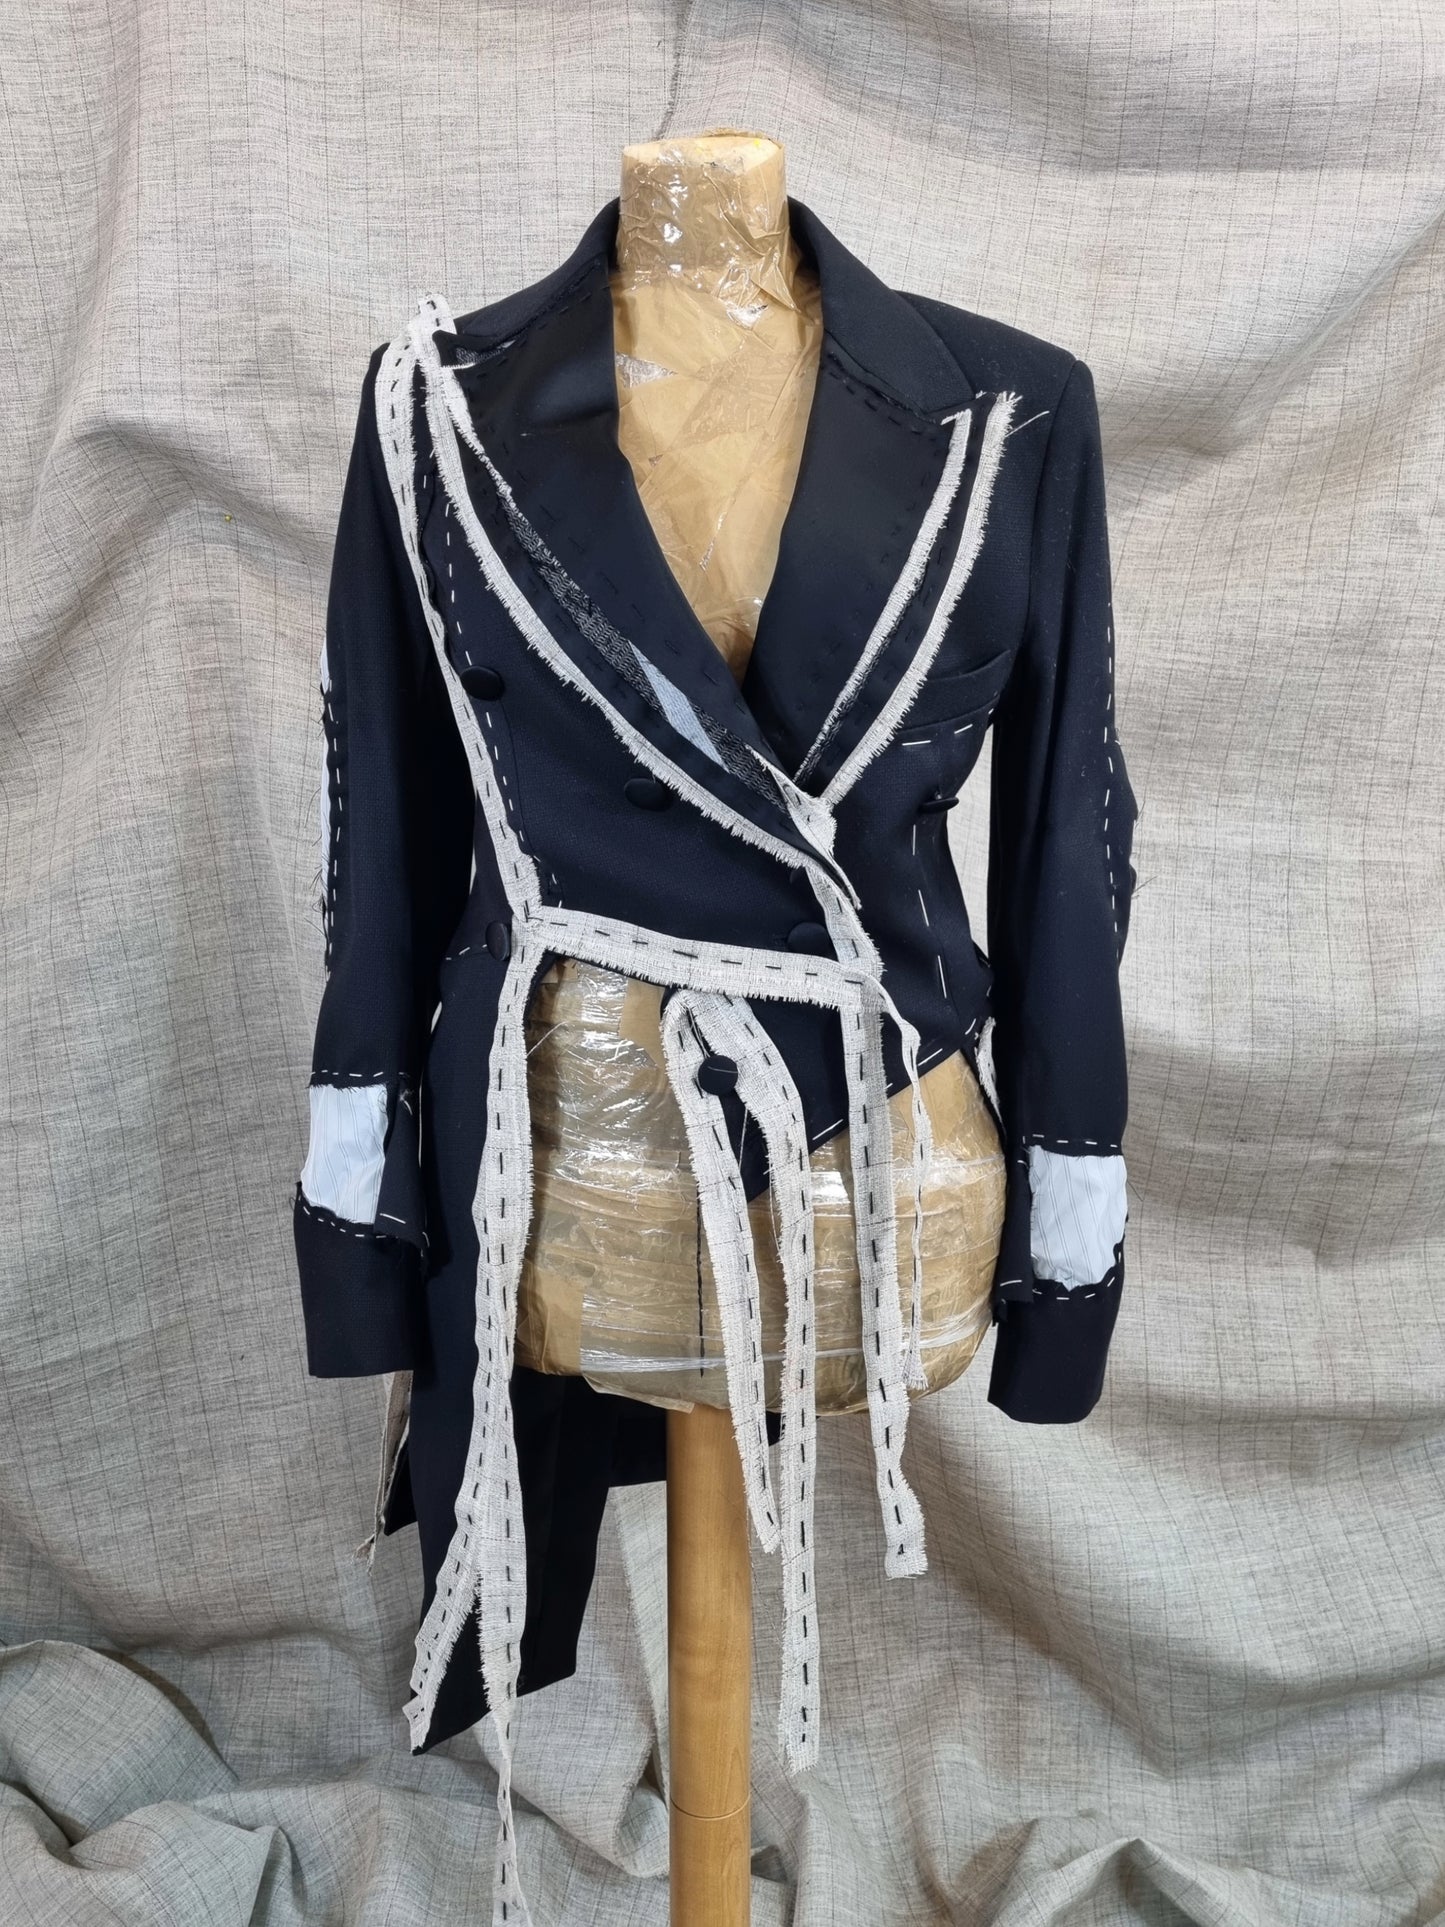 Cut-Out Tailcoat With Handmade Decorative Stitching